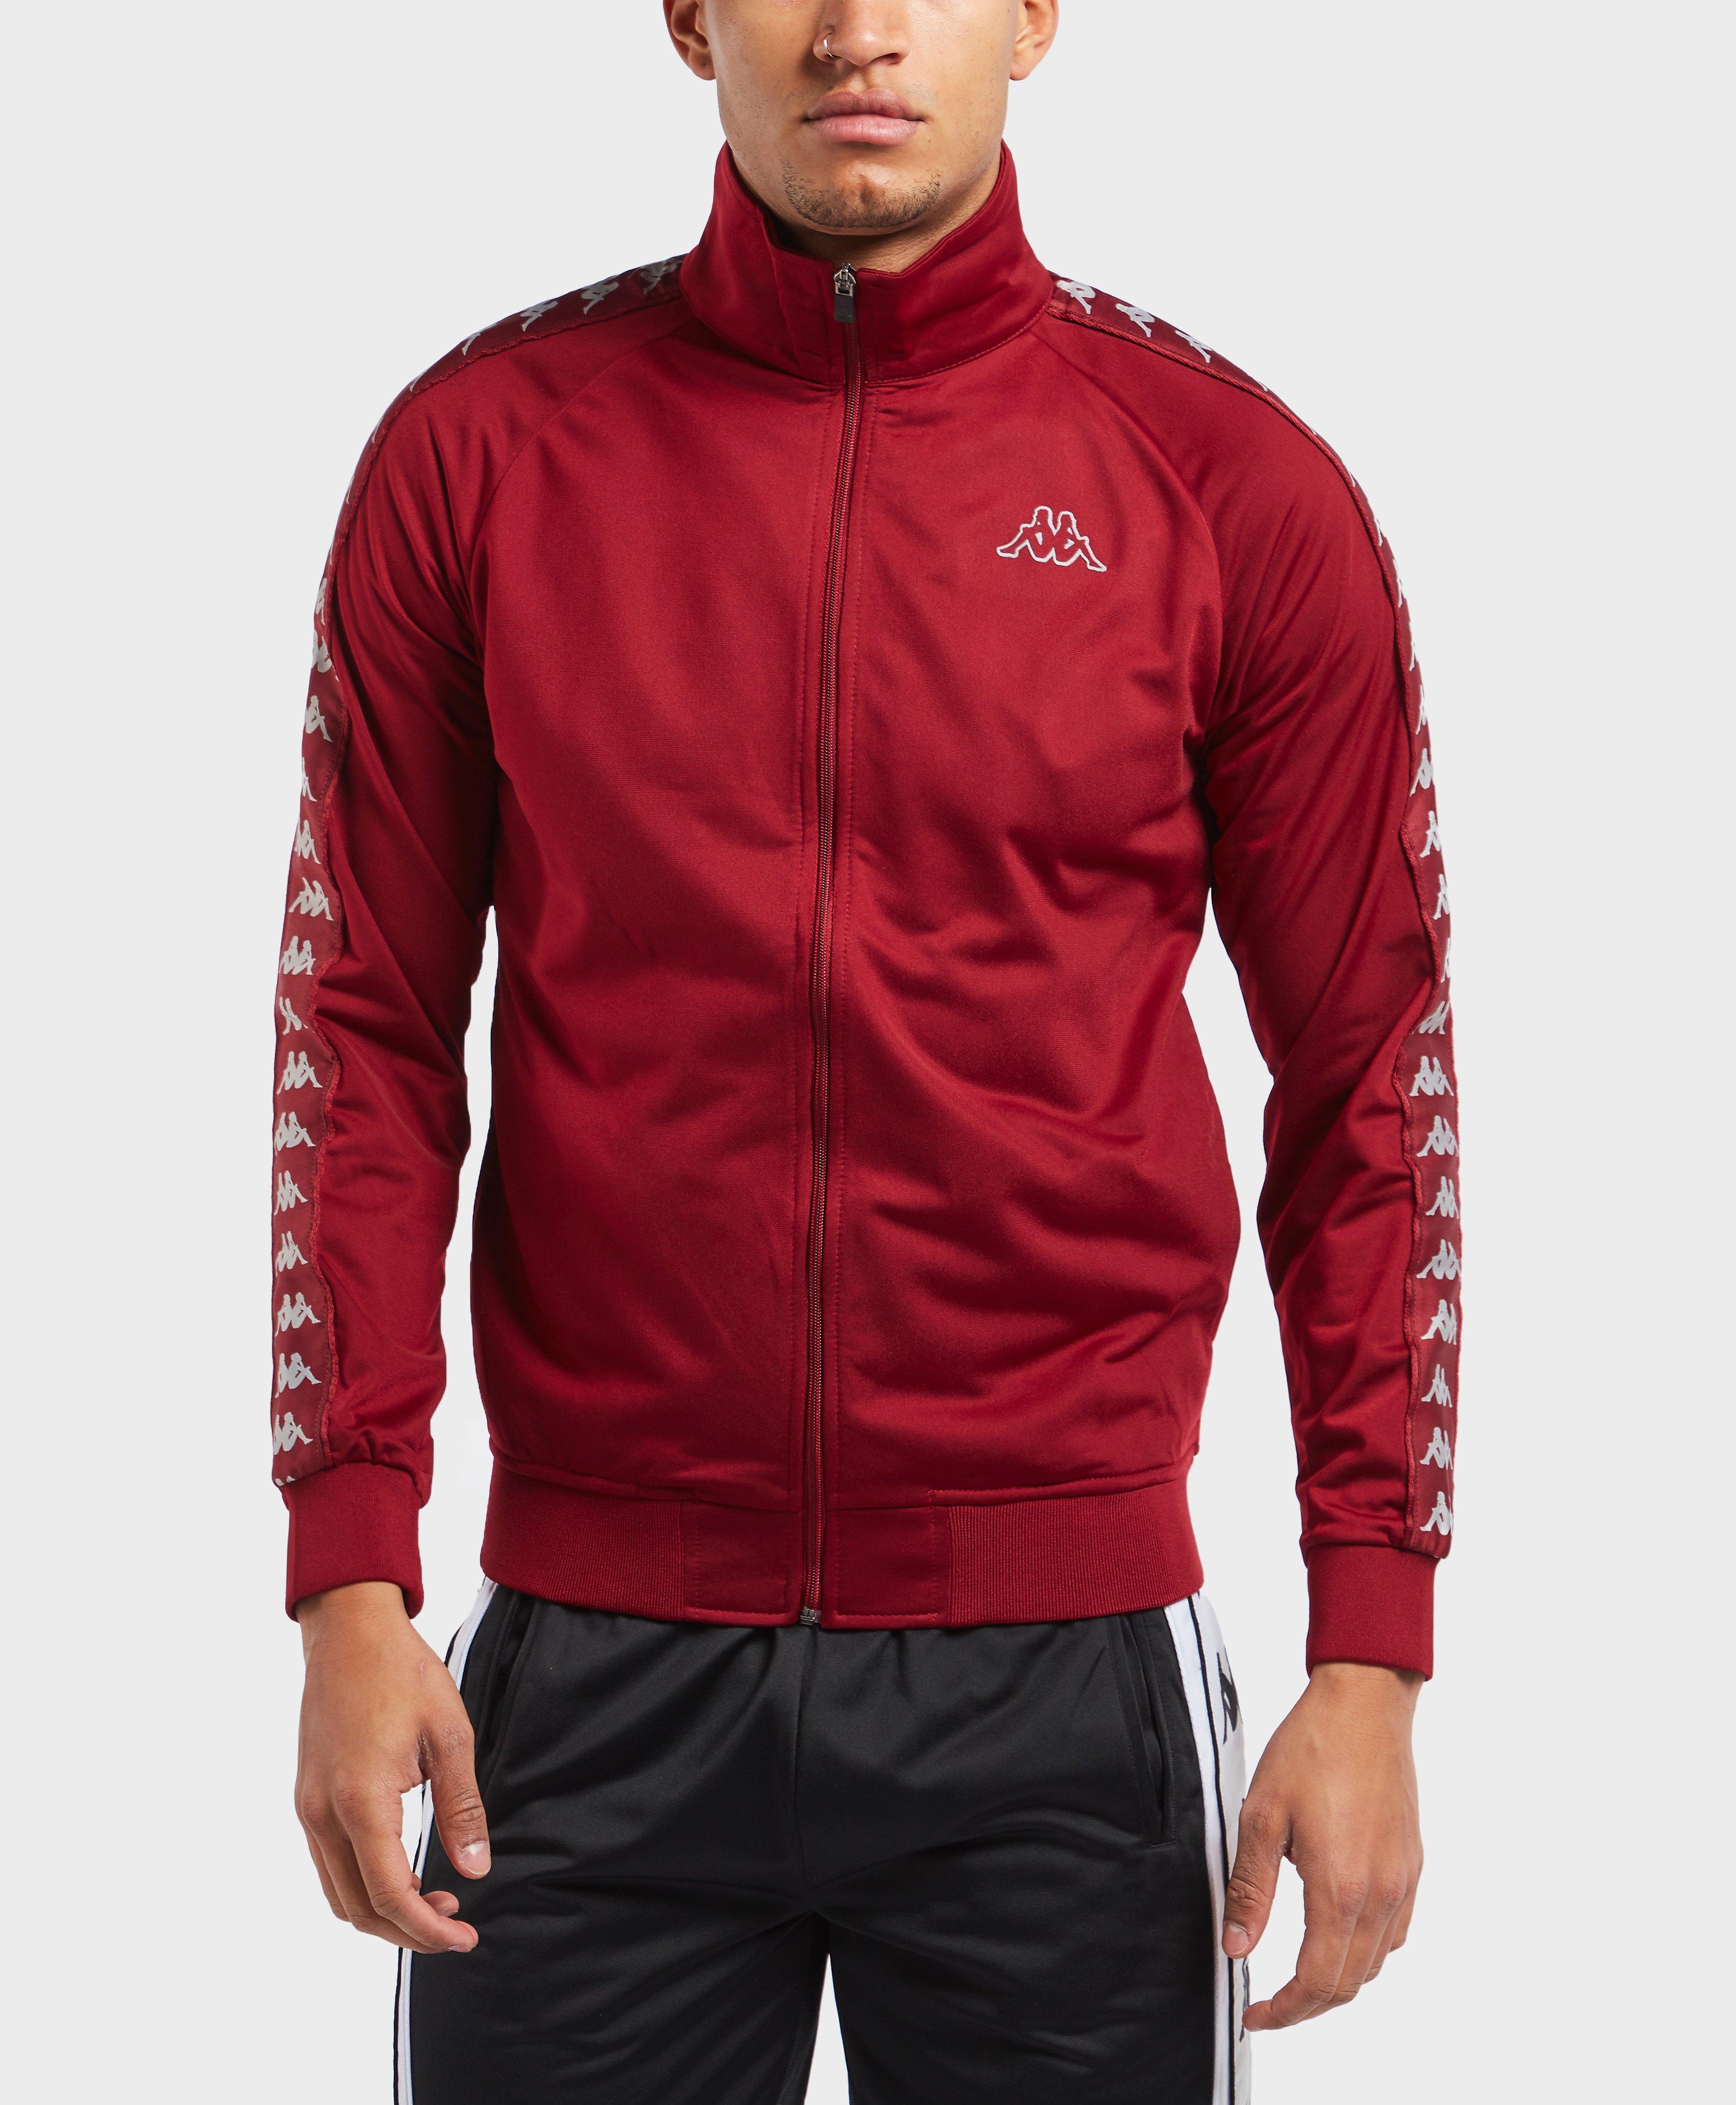 kappa astoria track top Shop Clothing & Shoes Online